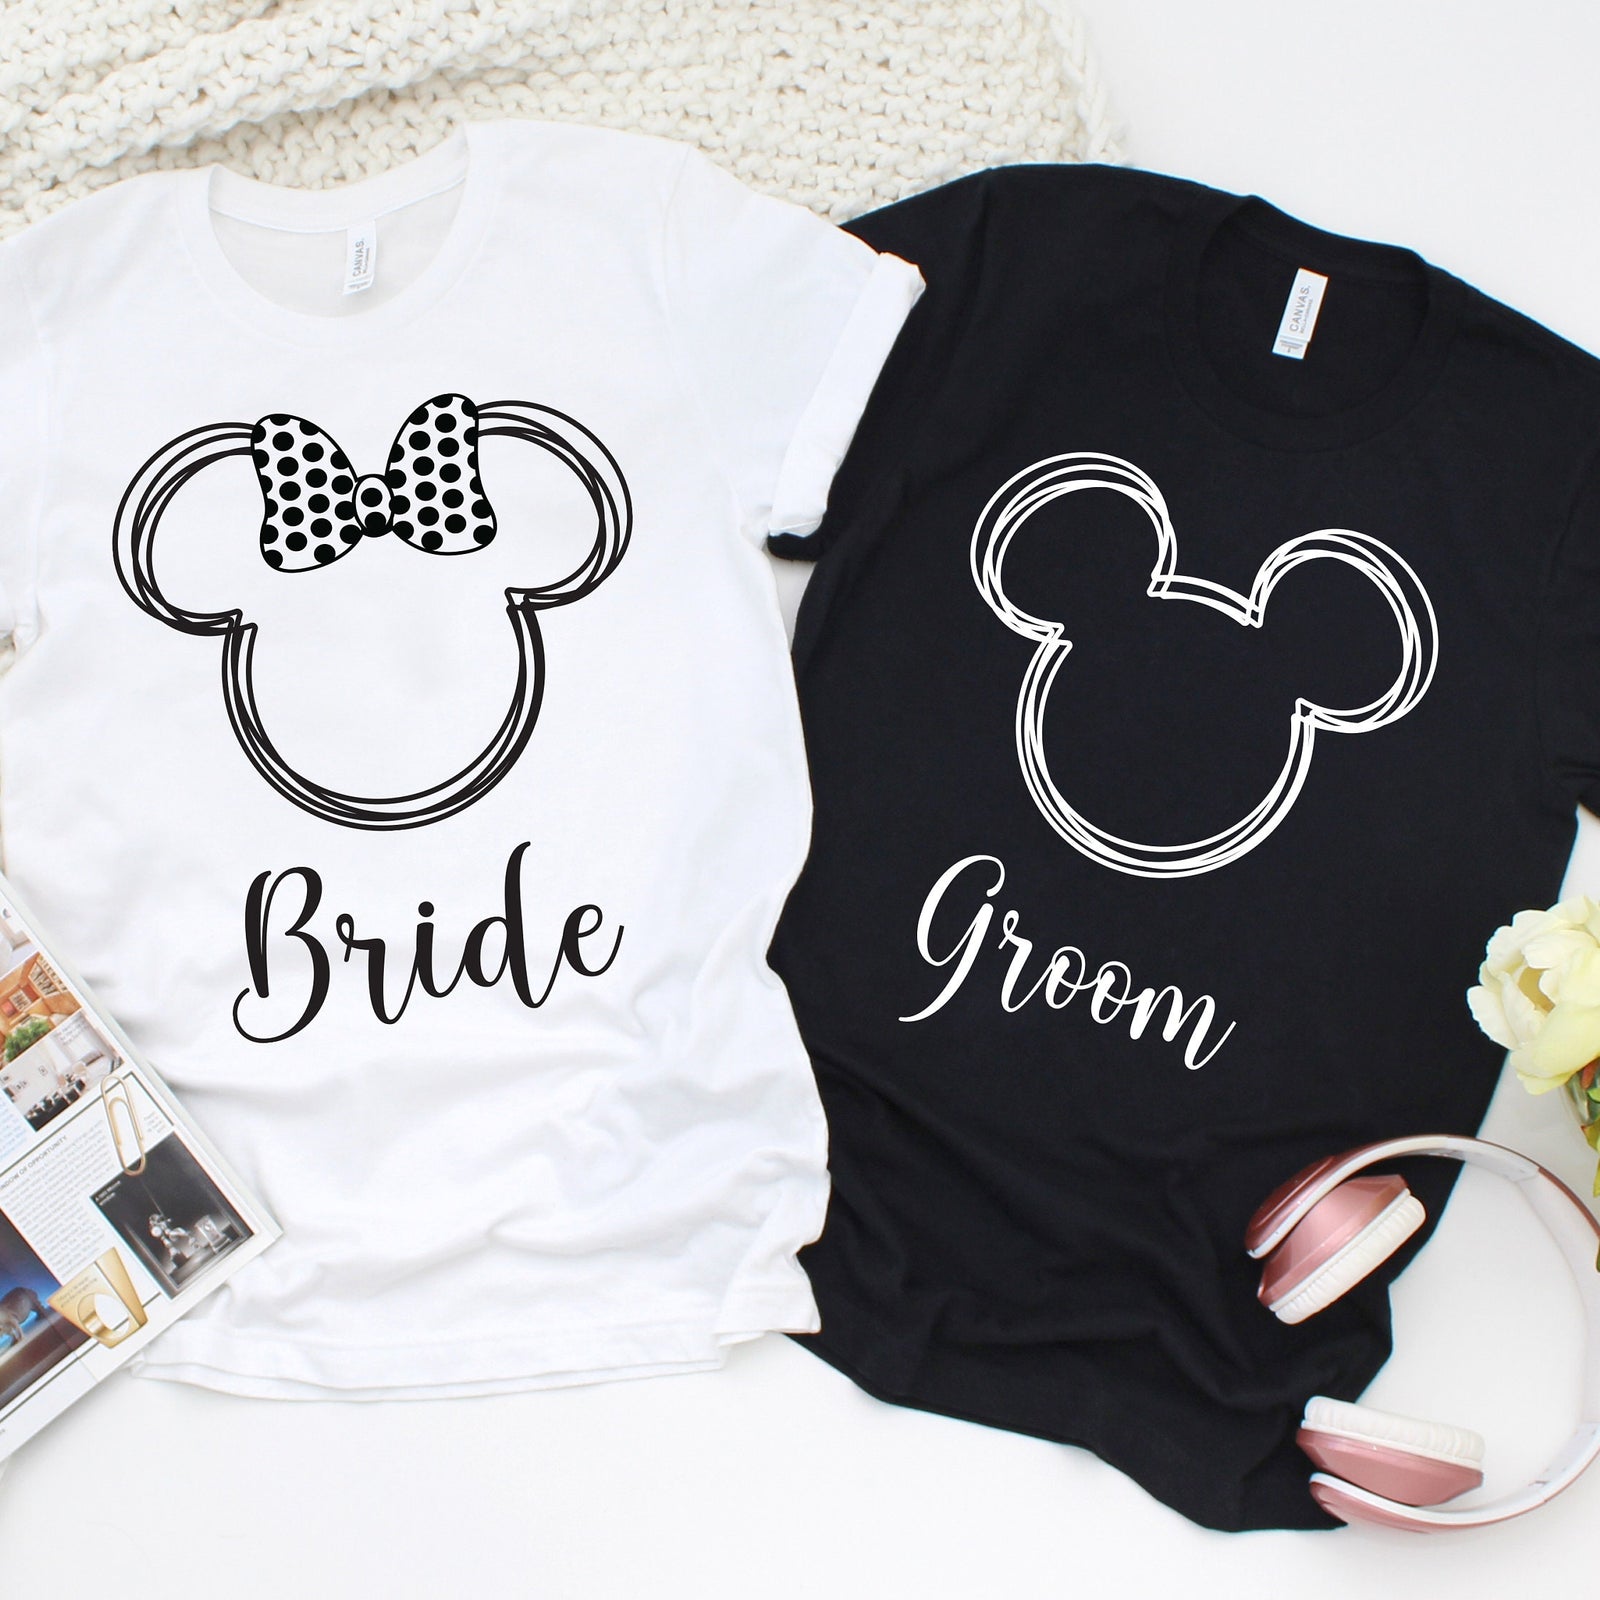 Bride and Groom Minnie and Mickey Shirts - Disney Couples - Matching Shirts - Hand Drawn Characters